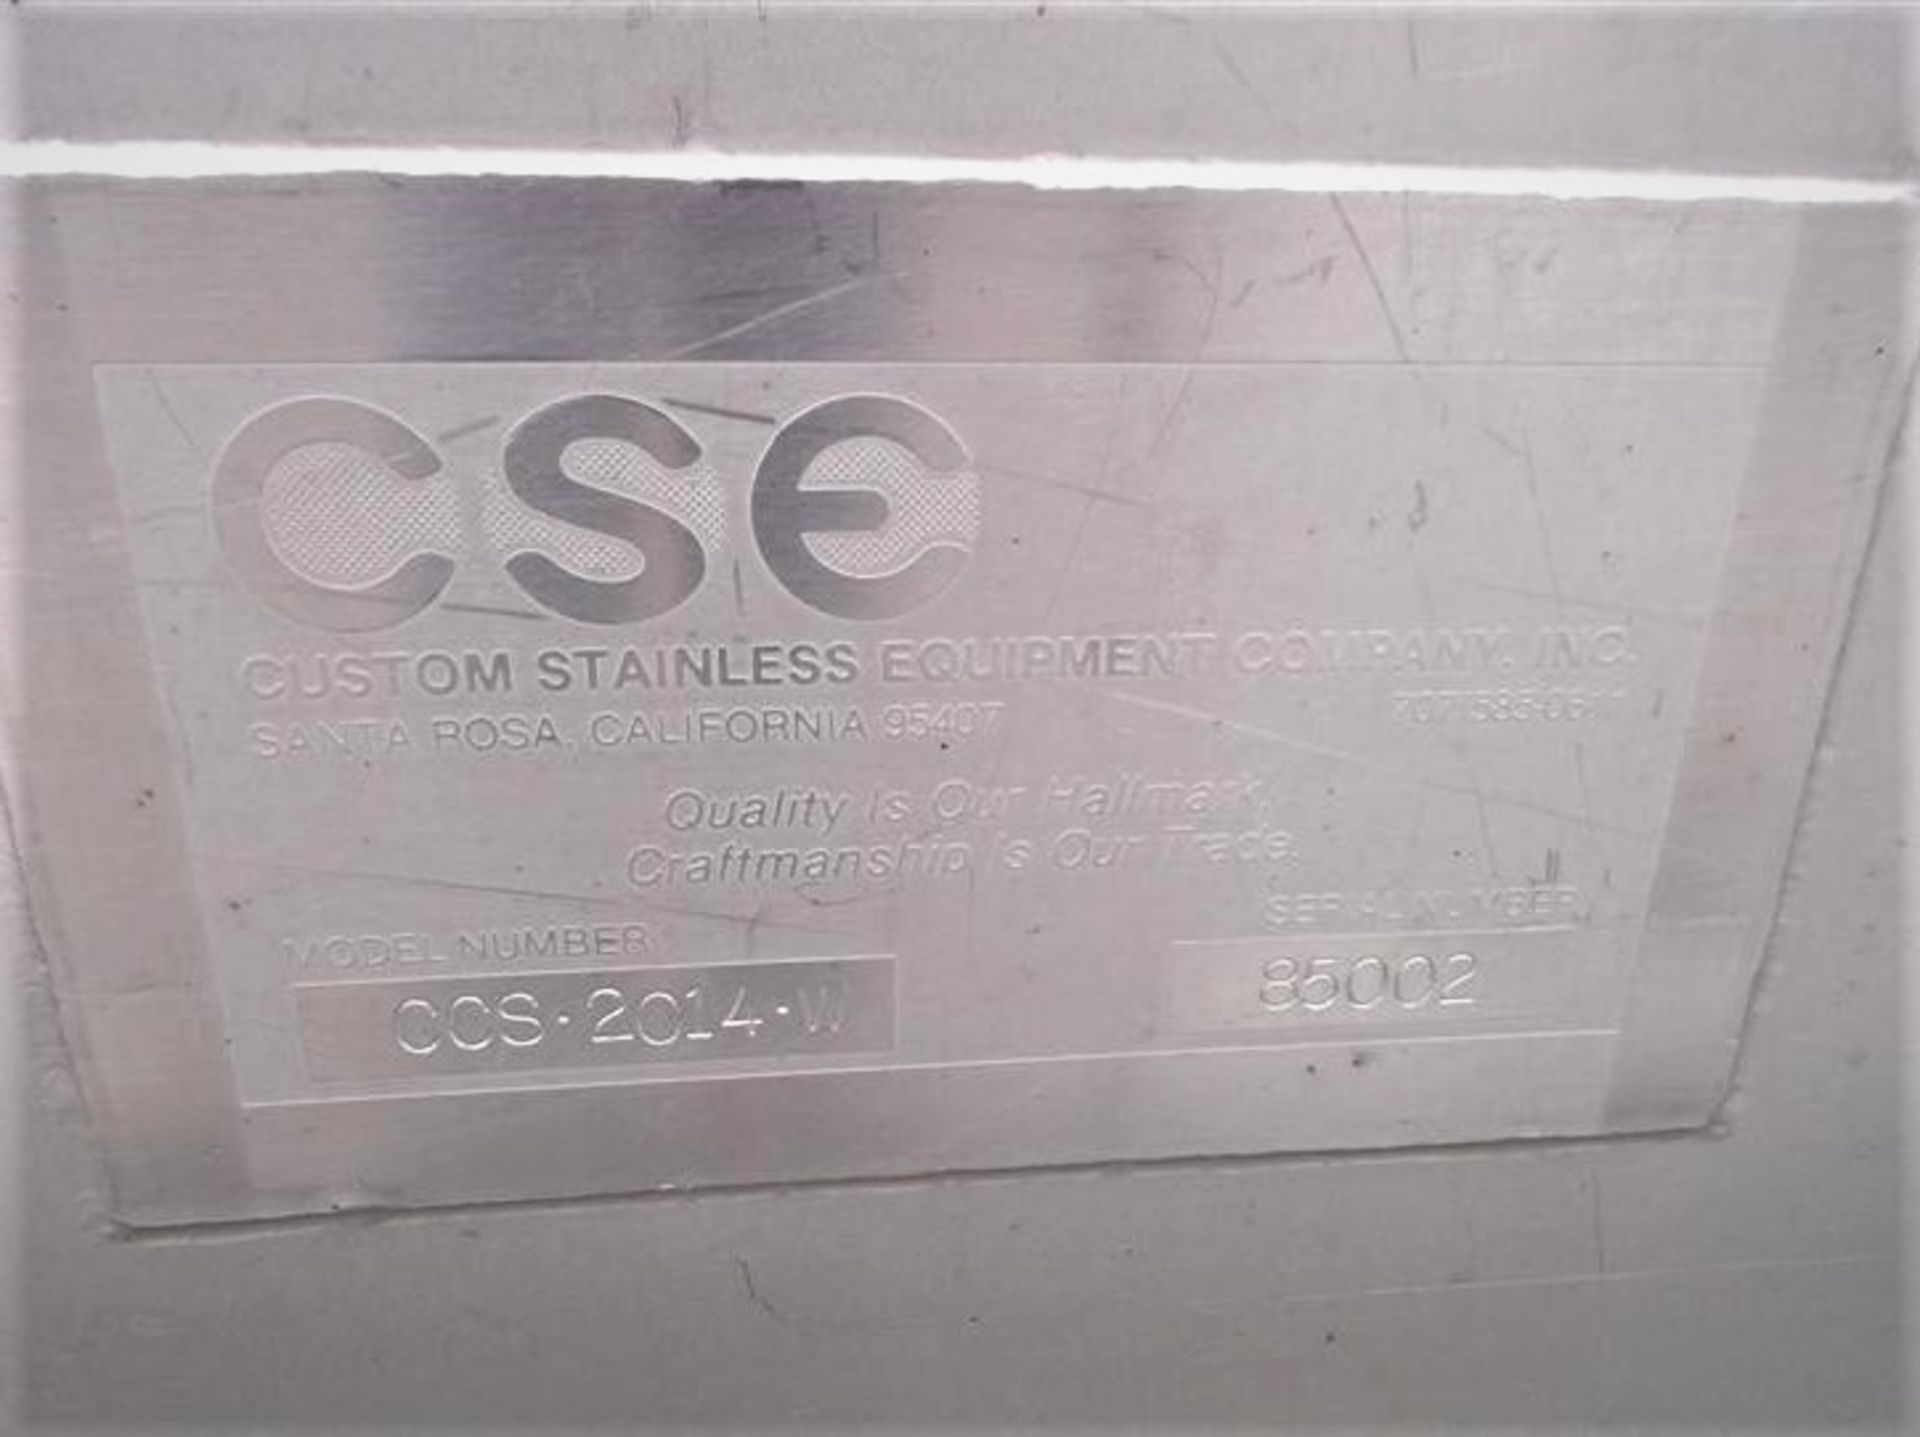 CSE S/S Sanitary Steam Injected Screw Cooker / Blancher, Model CCS.2014.W, S/N 85002, Aprox. 20" - Image 8 of 8